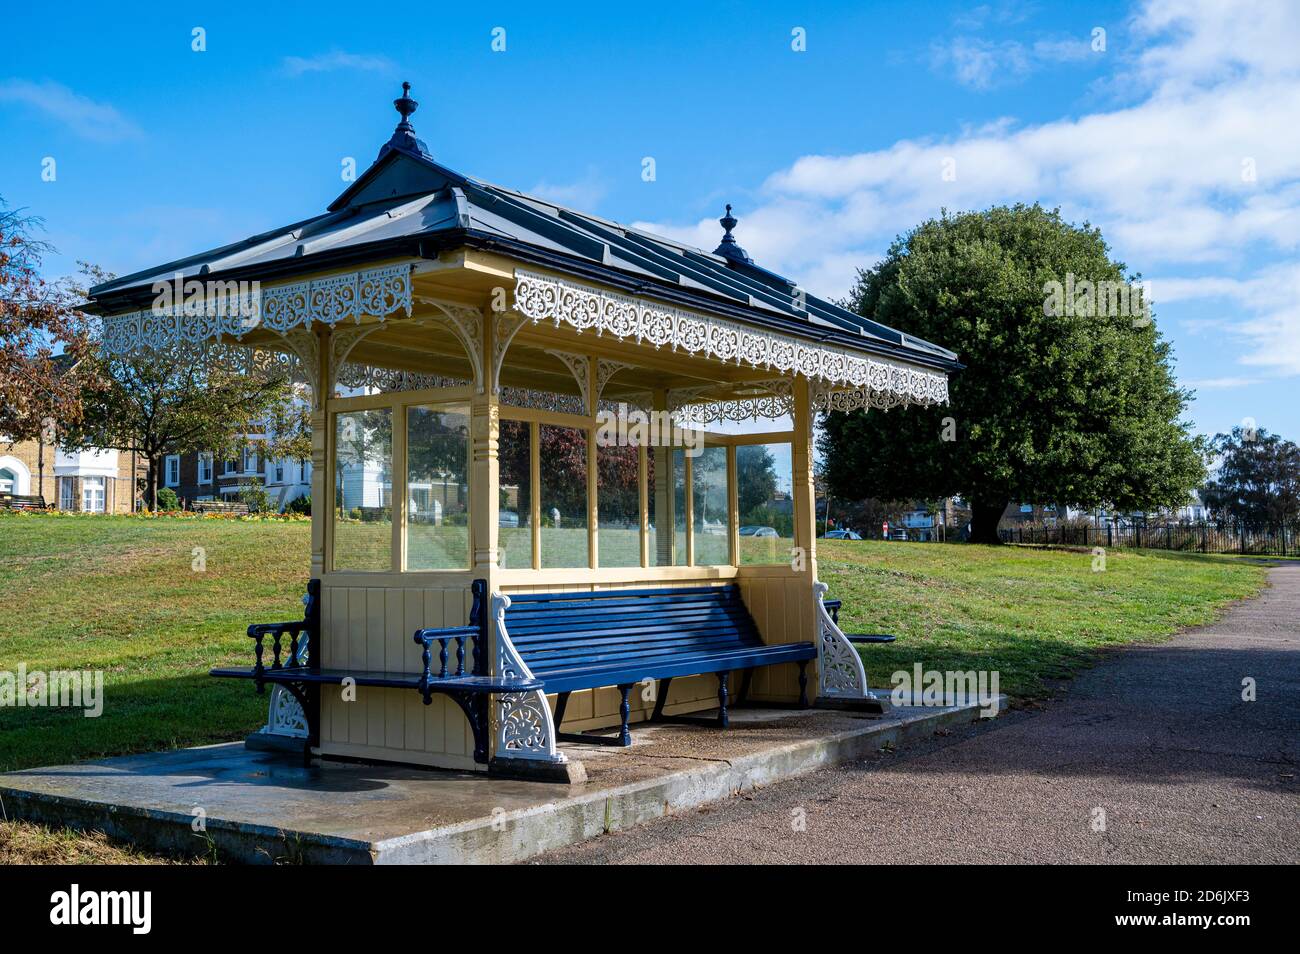 Historic shelter on Southend seafront cliffs gardens, recently restored and reformed to it's former glory. Stock Photo